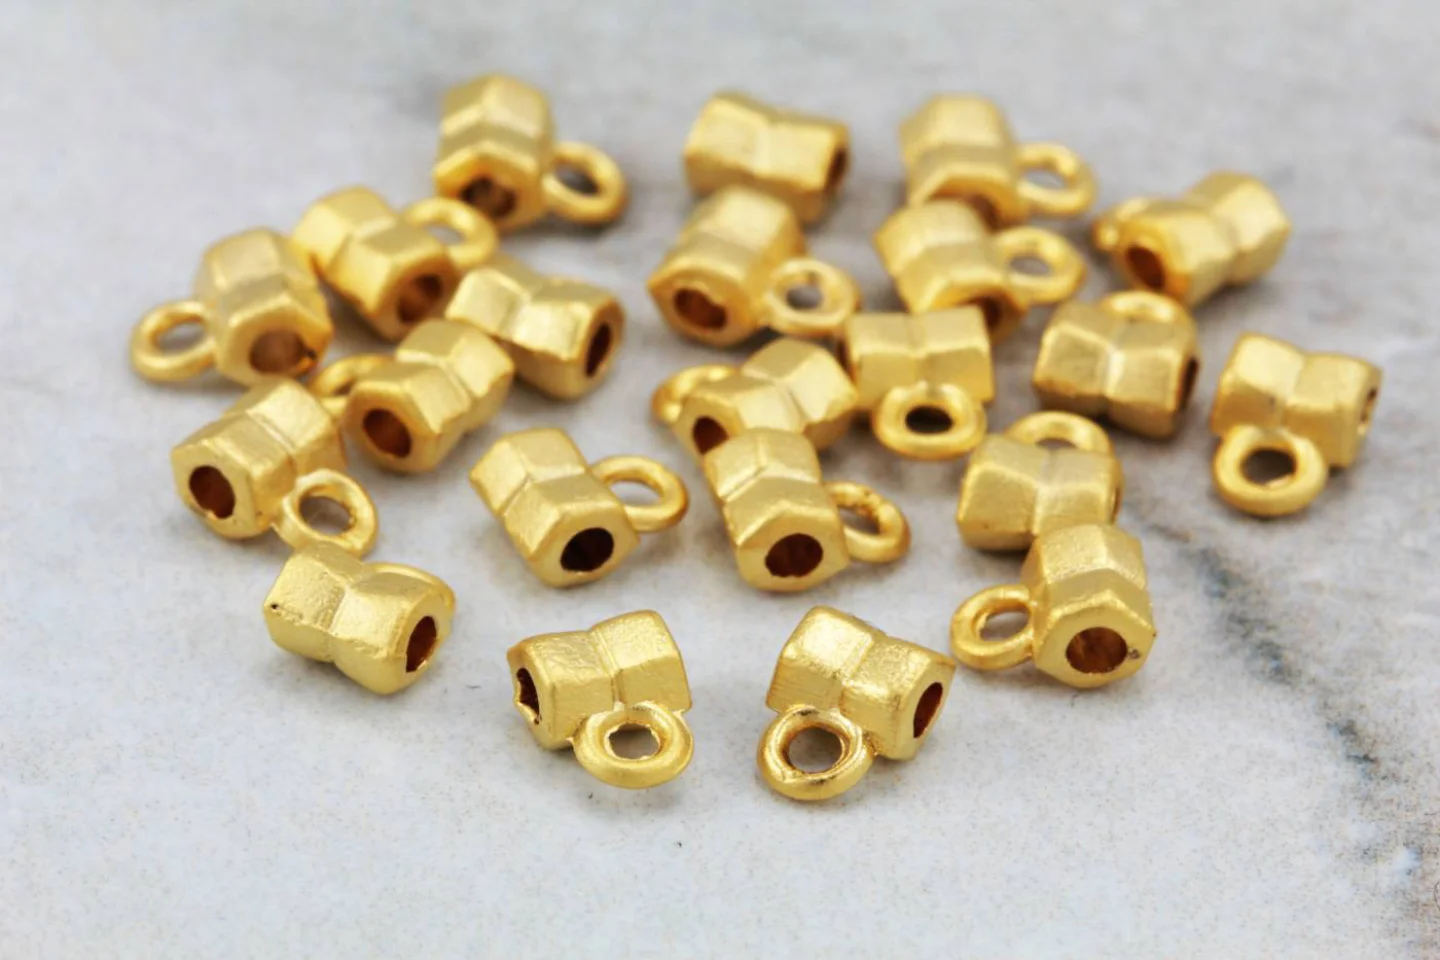 gold-tiny-metal-slider-charm-findings.